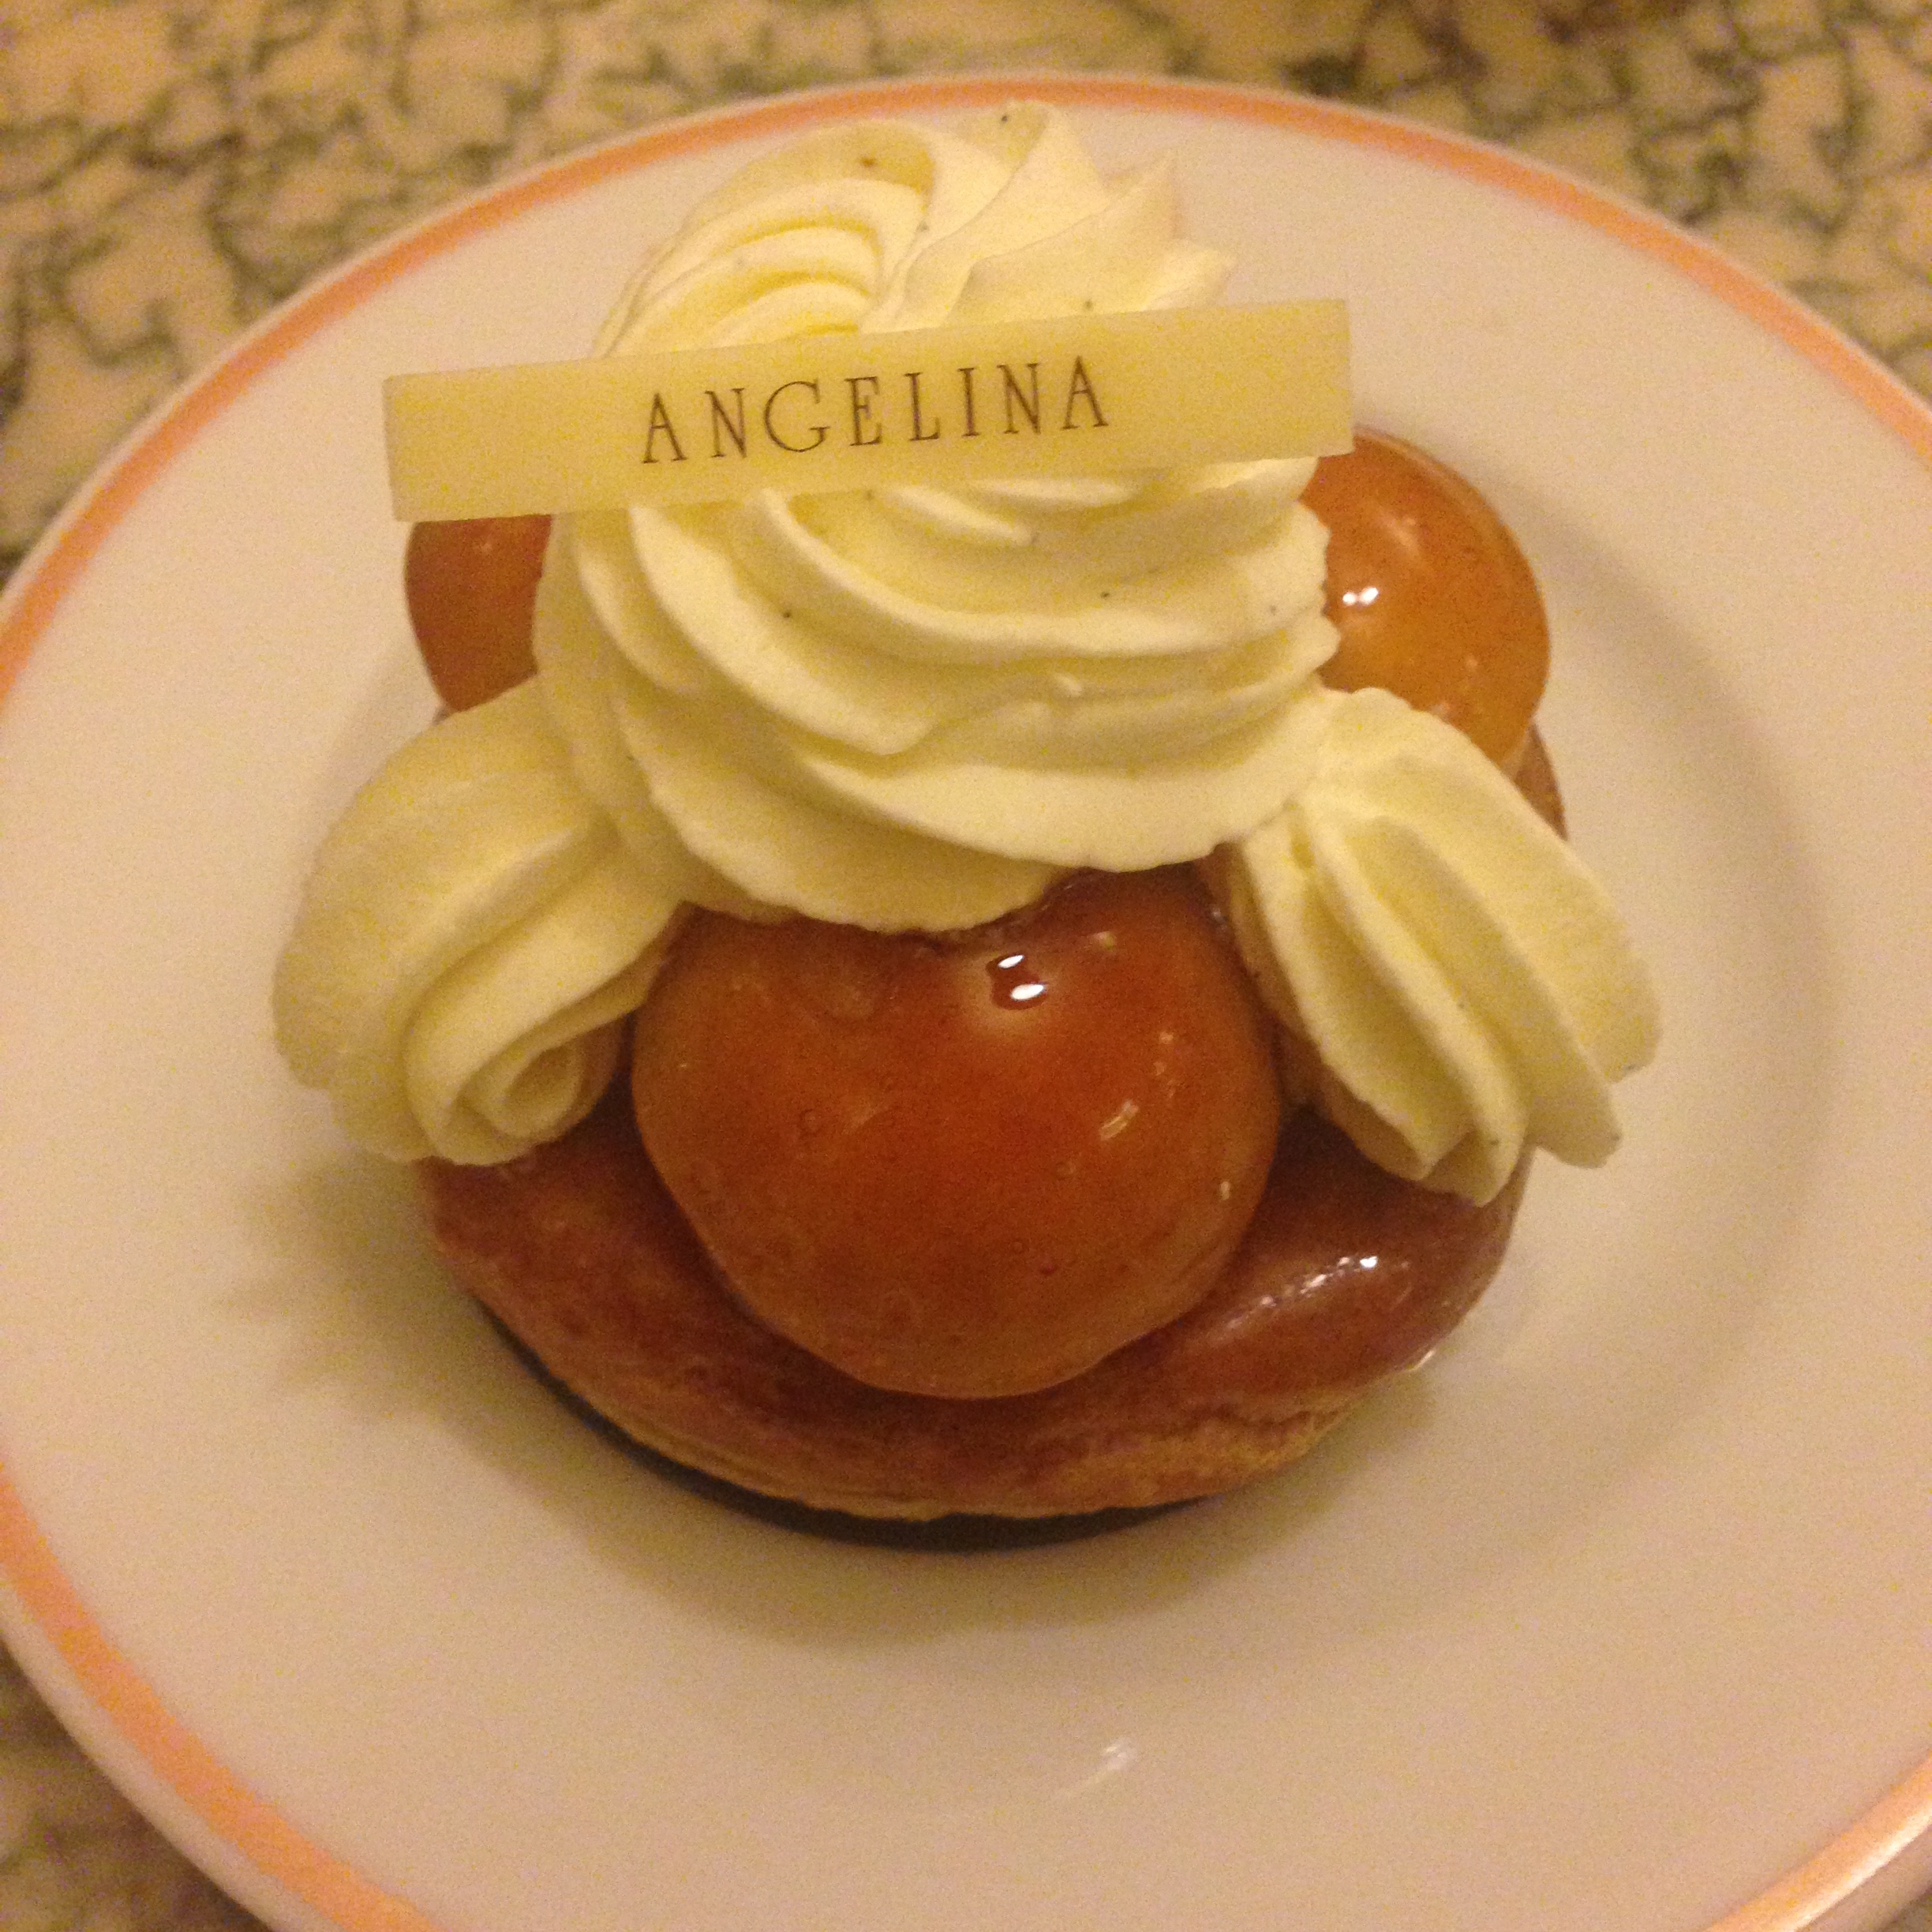  St. Honore pastry at Angelina 